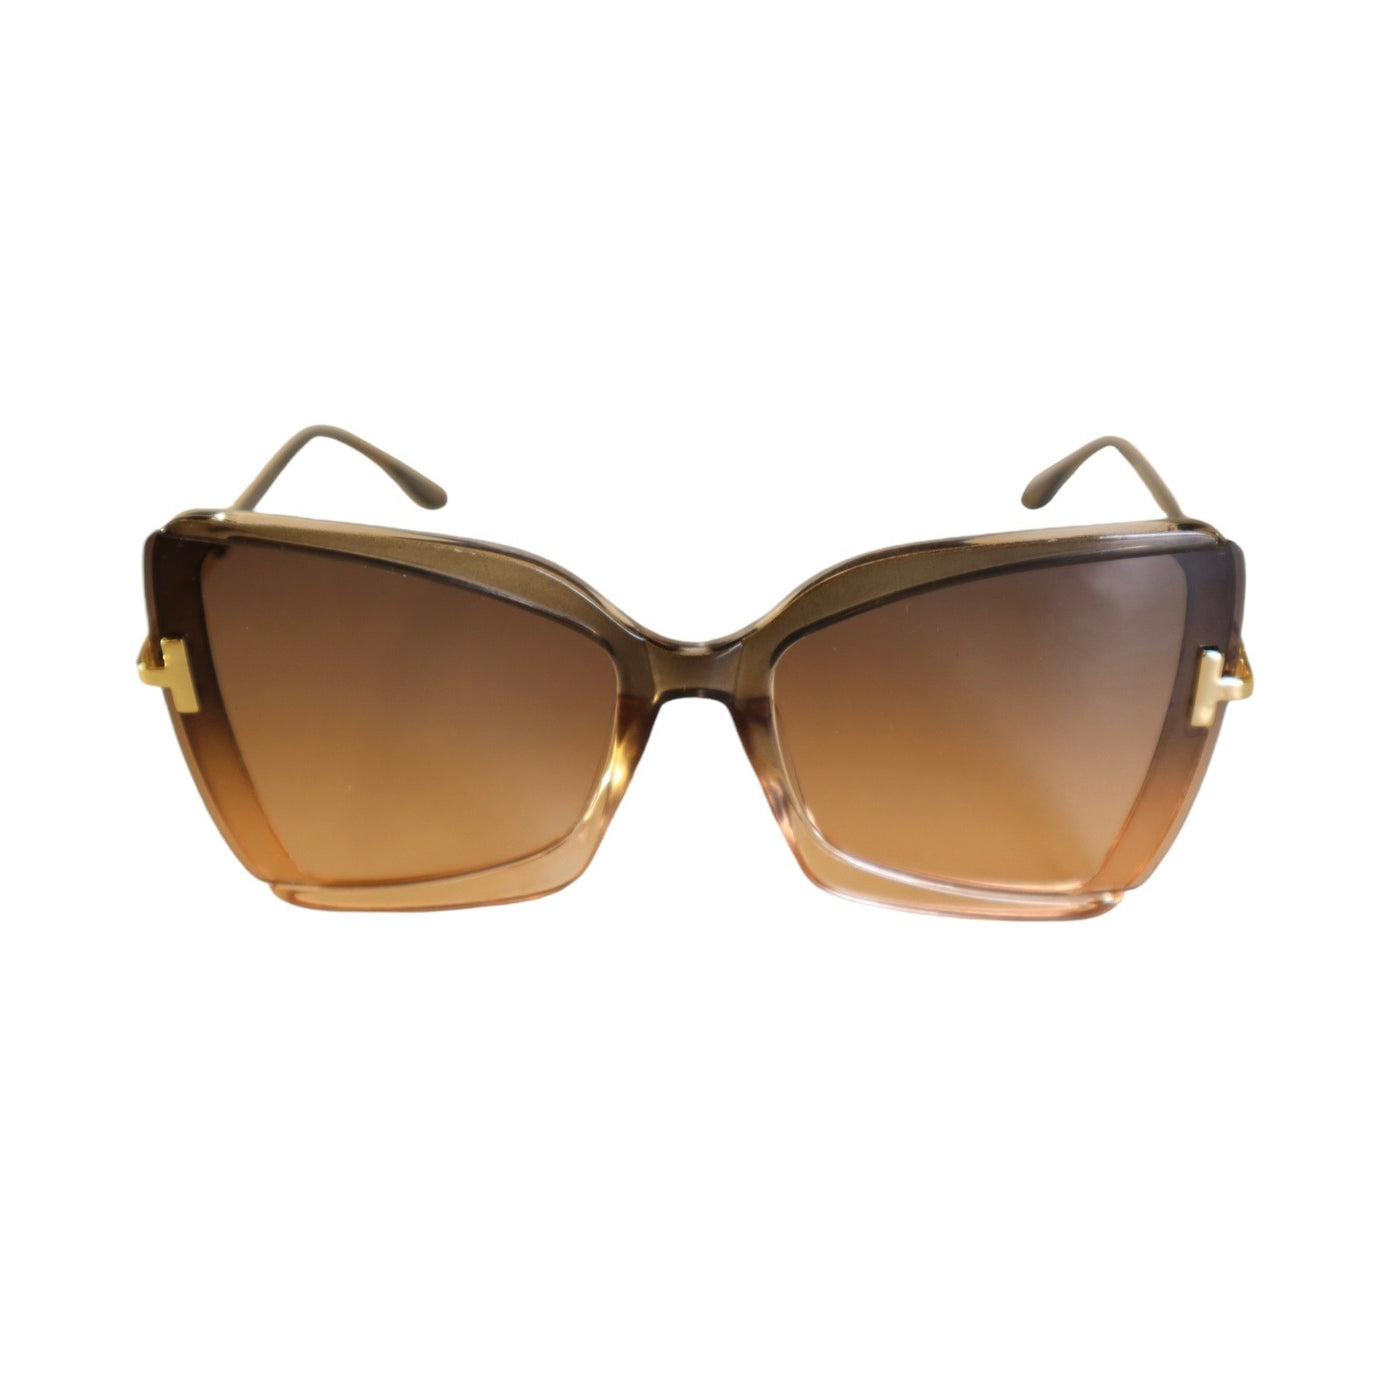 Out-n-About Semi Rimless Cateye Sunglasses w/ Black/Tan Gradient Lens and Frame